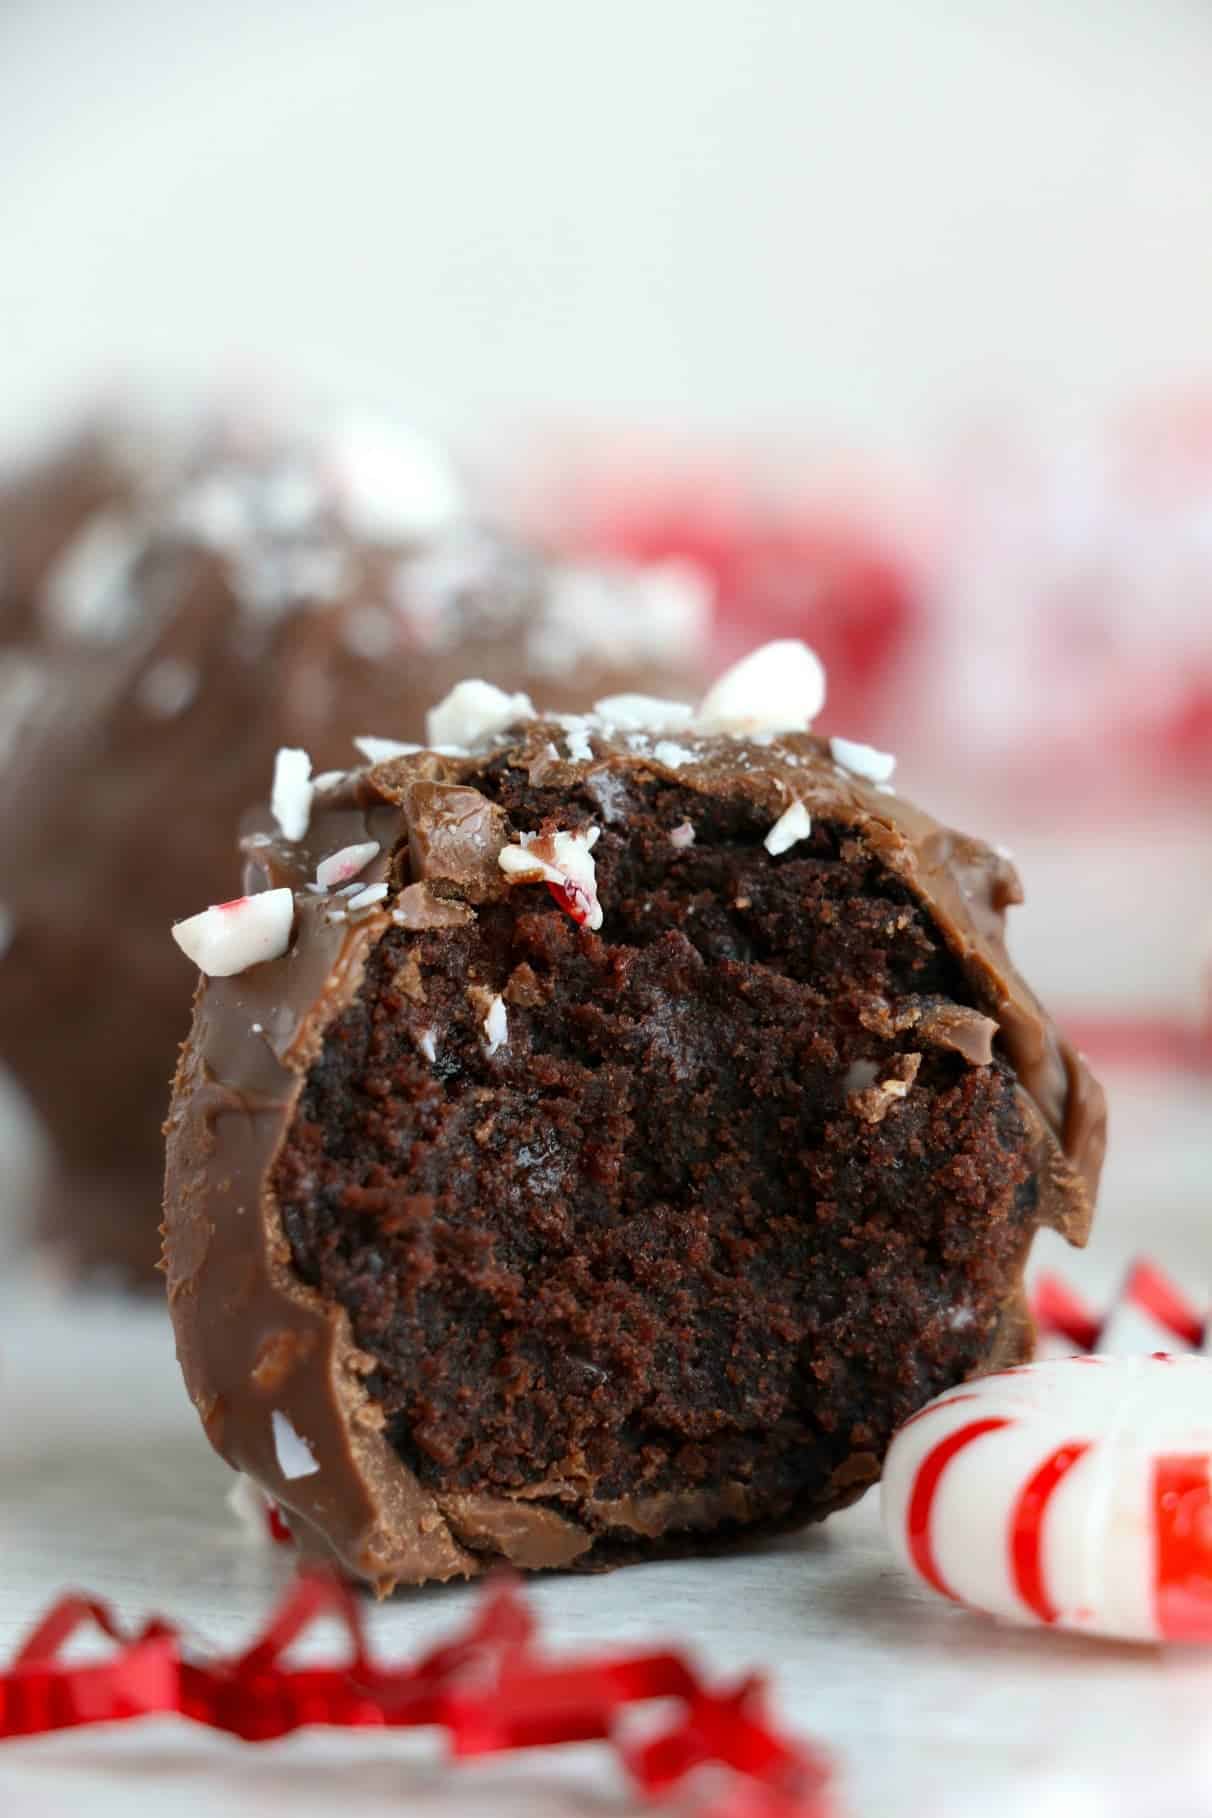 Peppermint chocolate cake truffle with a bite out of it and a peppermint candy on the side.